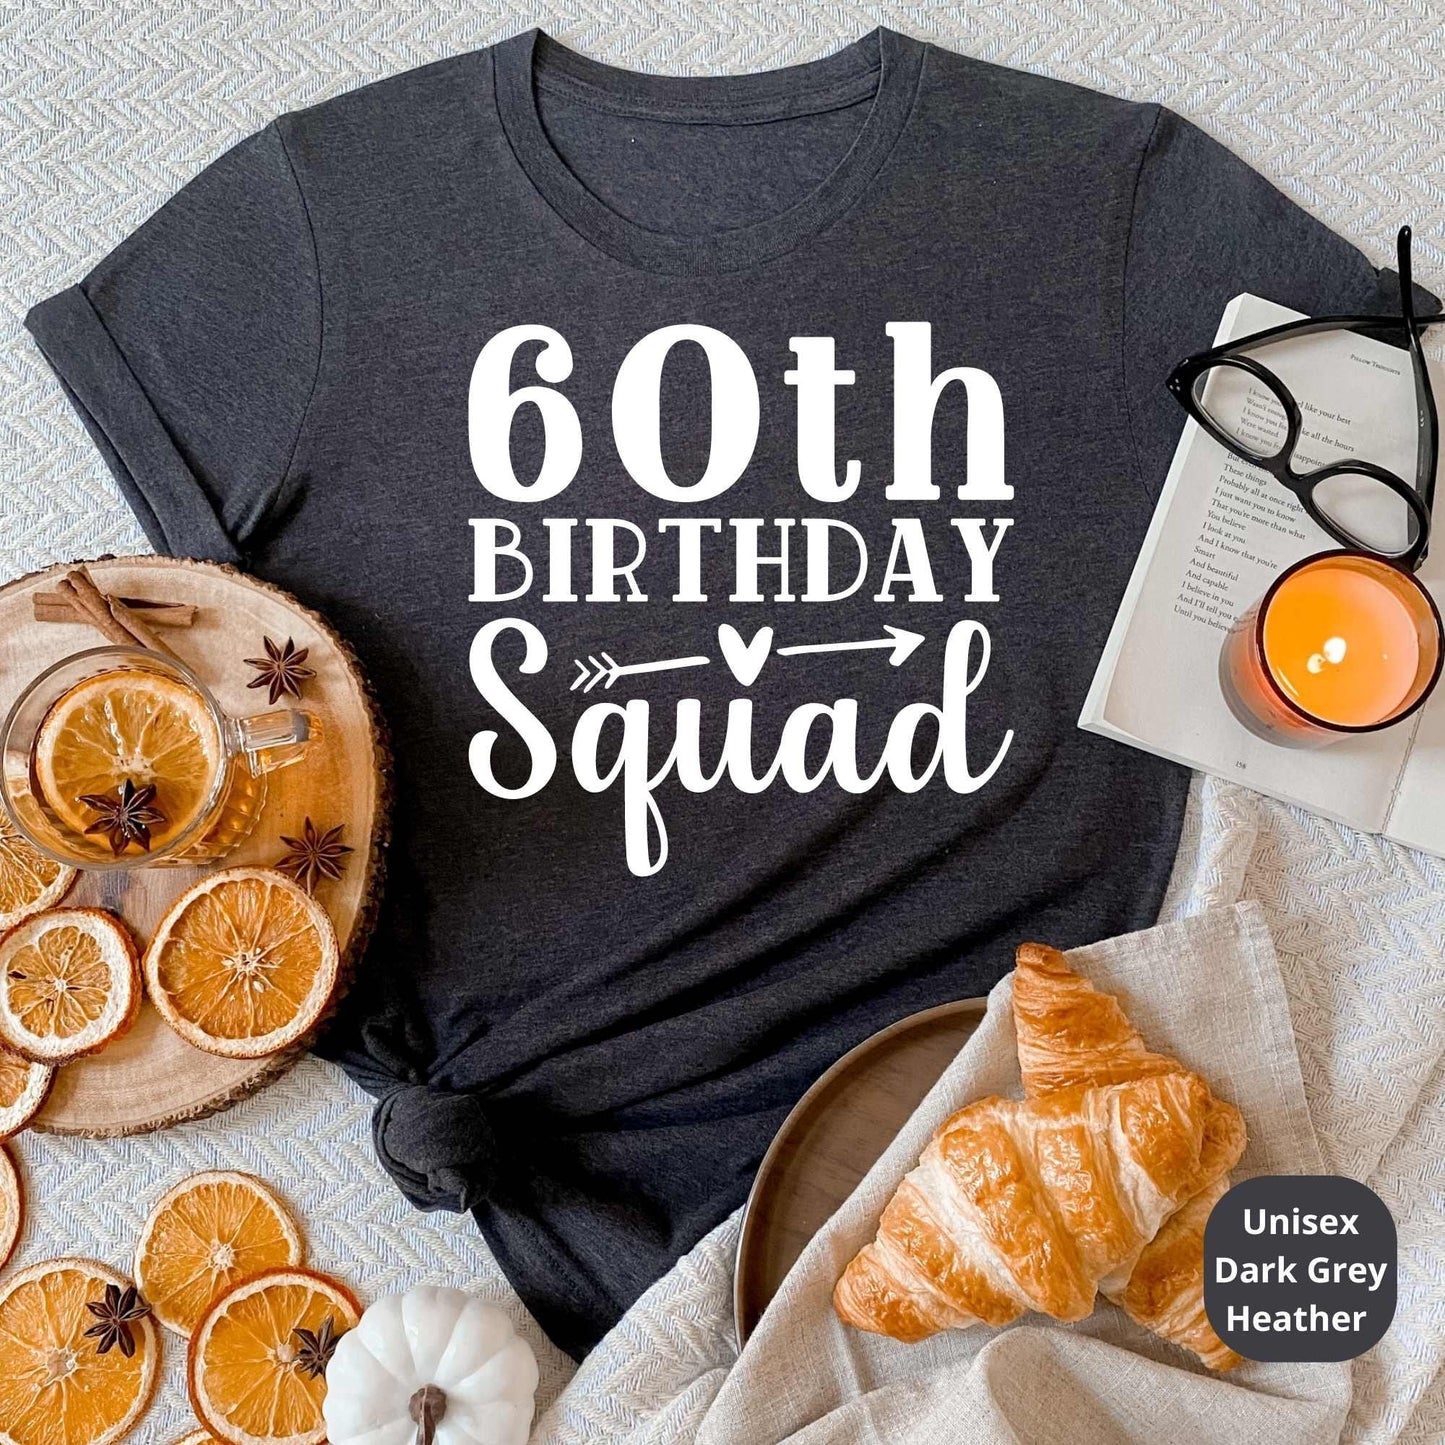 60th Birthday Squad Shirt, 60th Birthday Gift, Bday Crew T-Shirts, Family Matching Party Tees, Group Tshirts for Anniversary Celebration HMDesignStudioUS